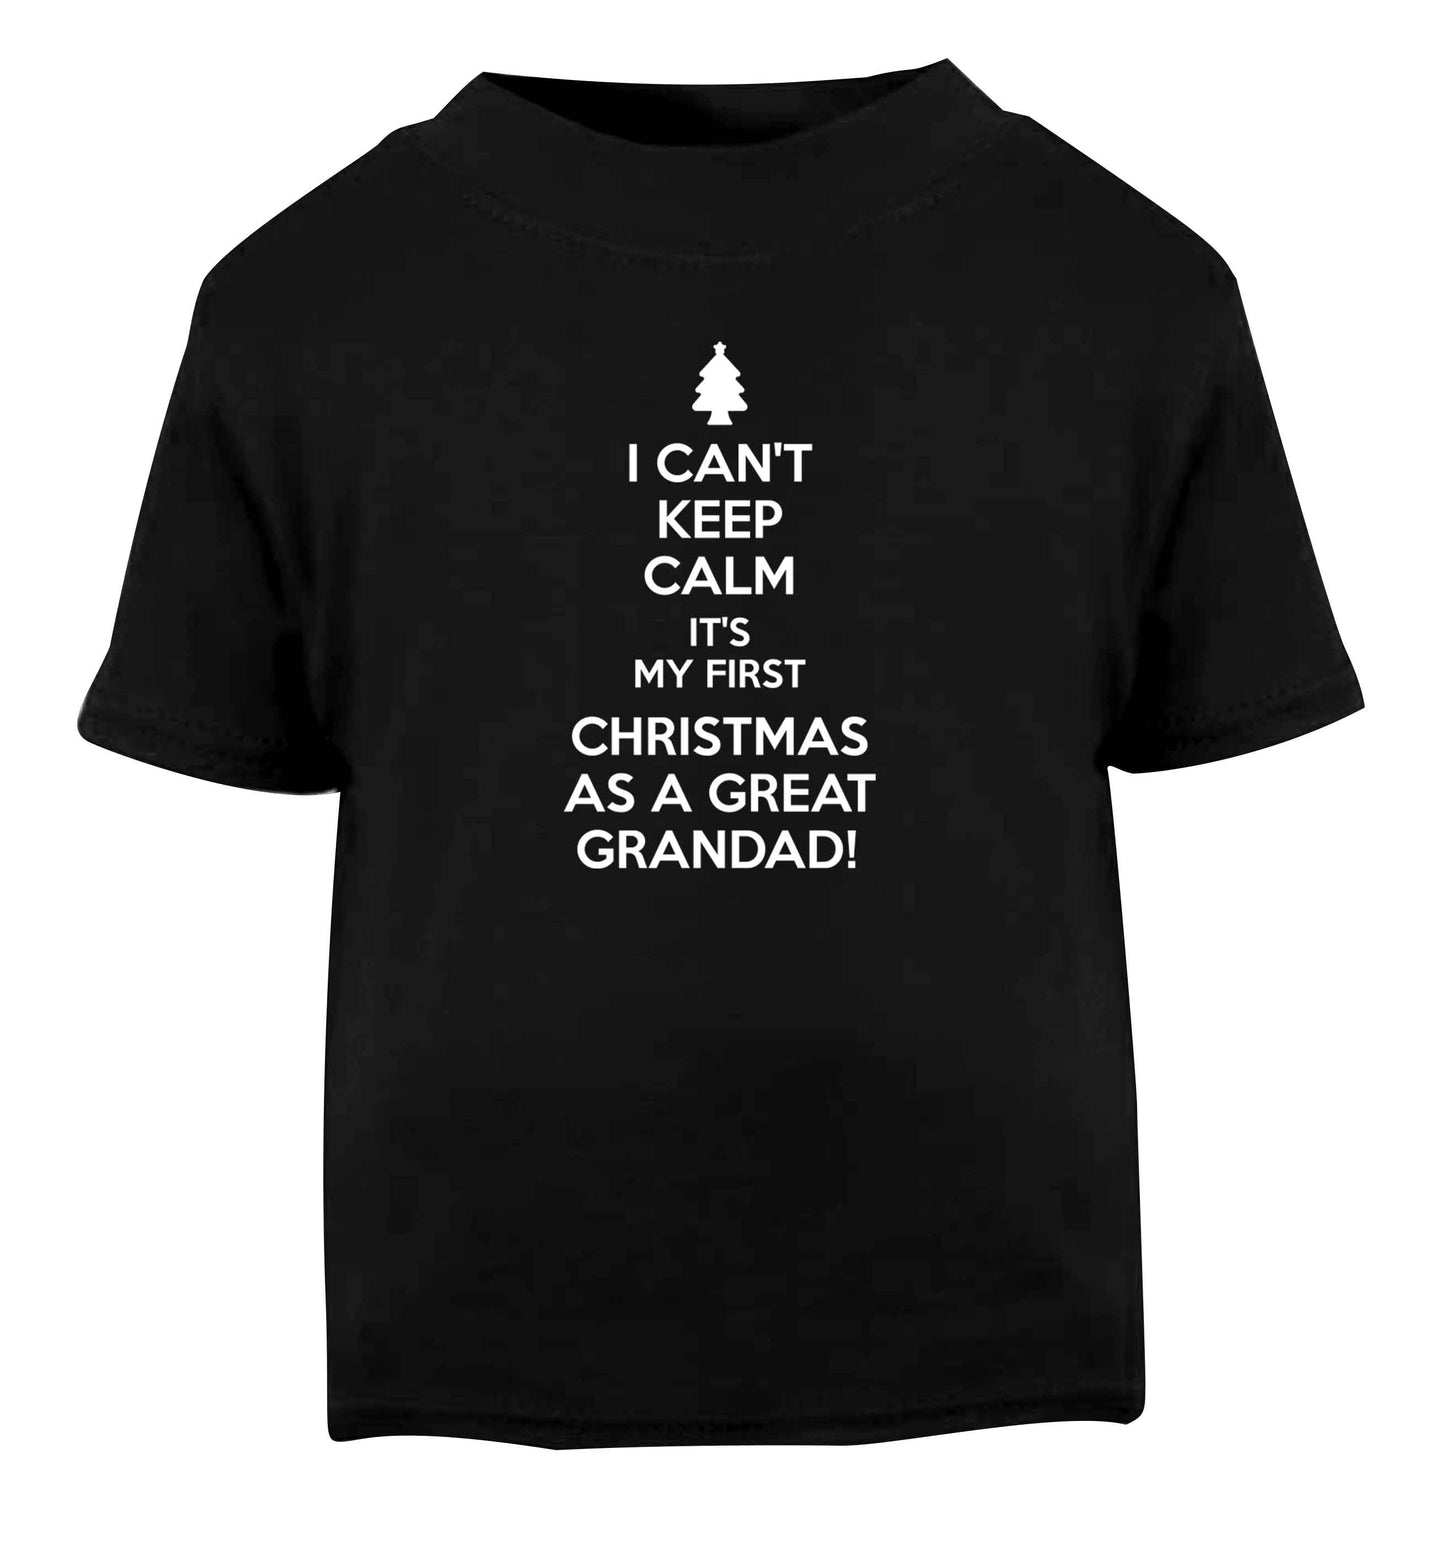 I can't keep calm it's my first Christmas as a great grandad! Black Baby Toddler Tshirt 2 years